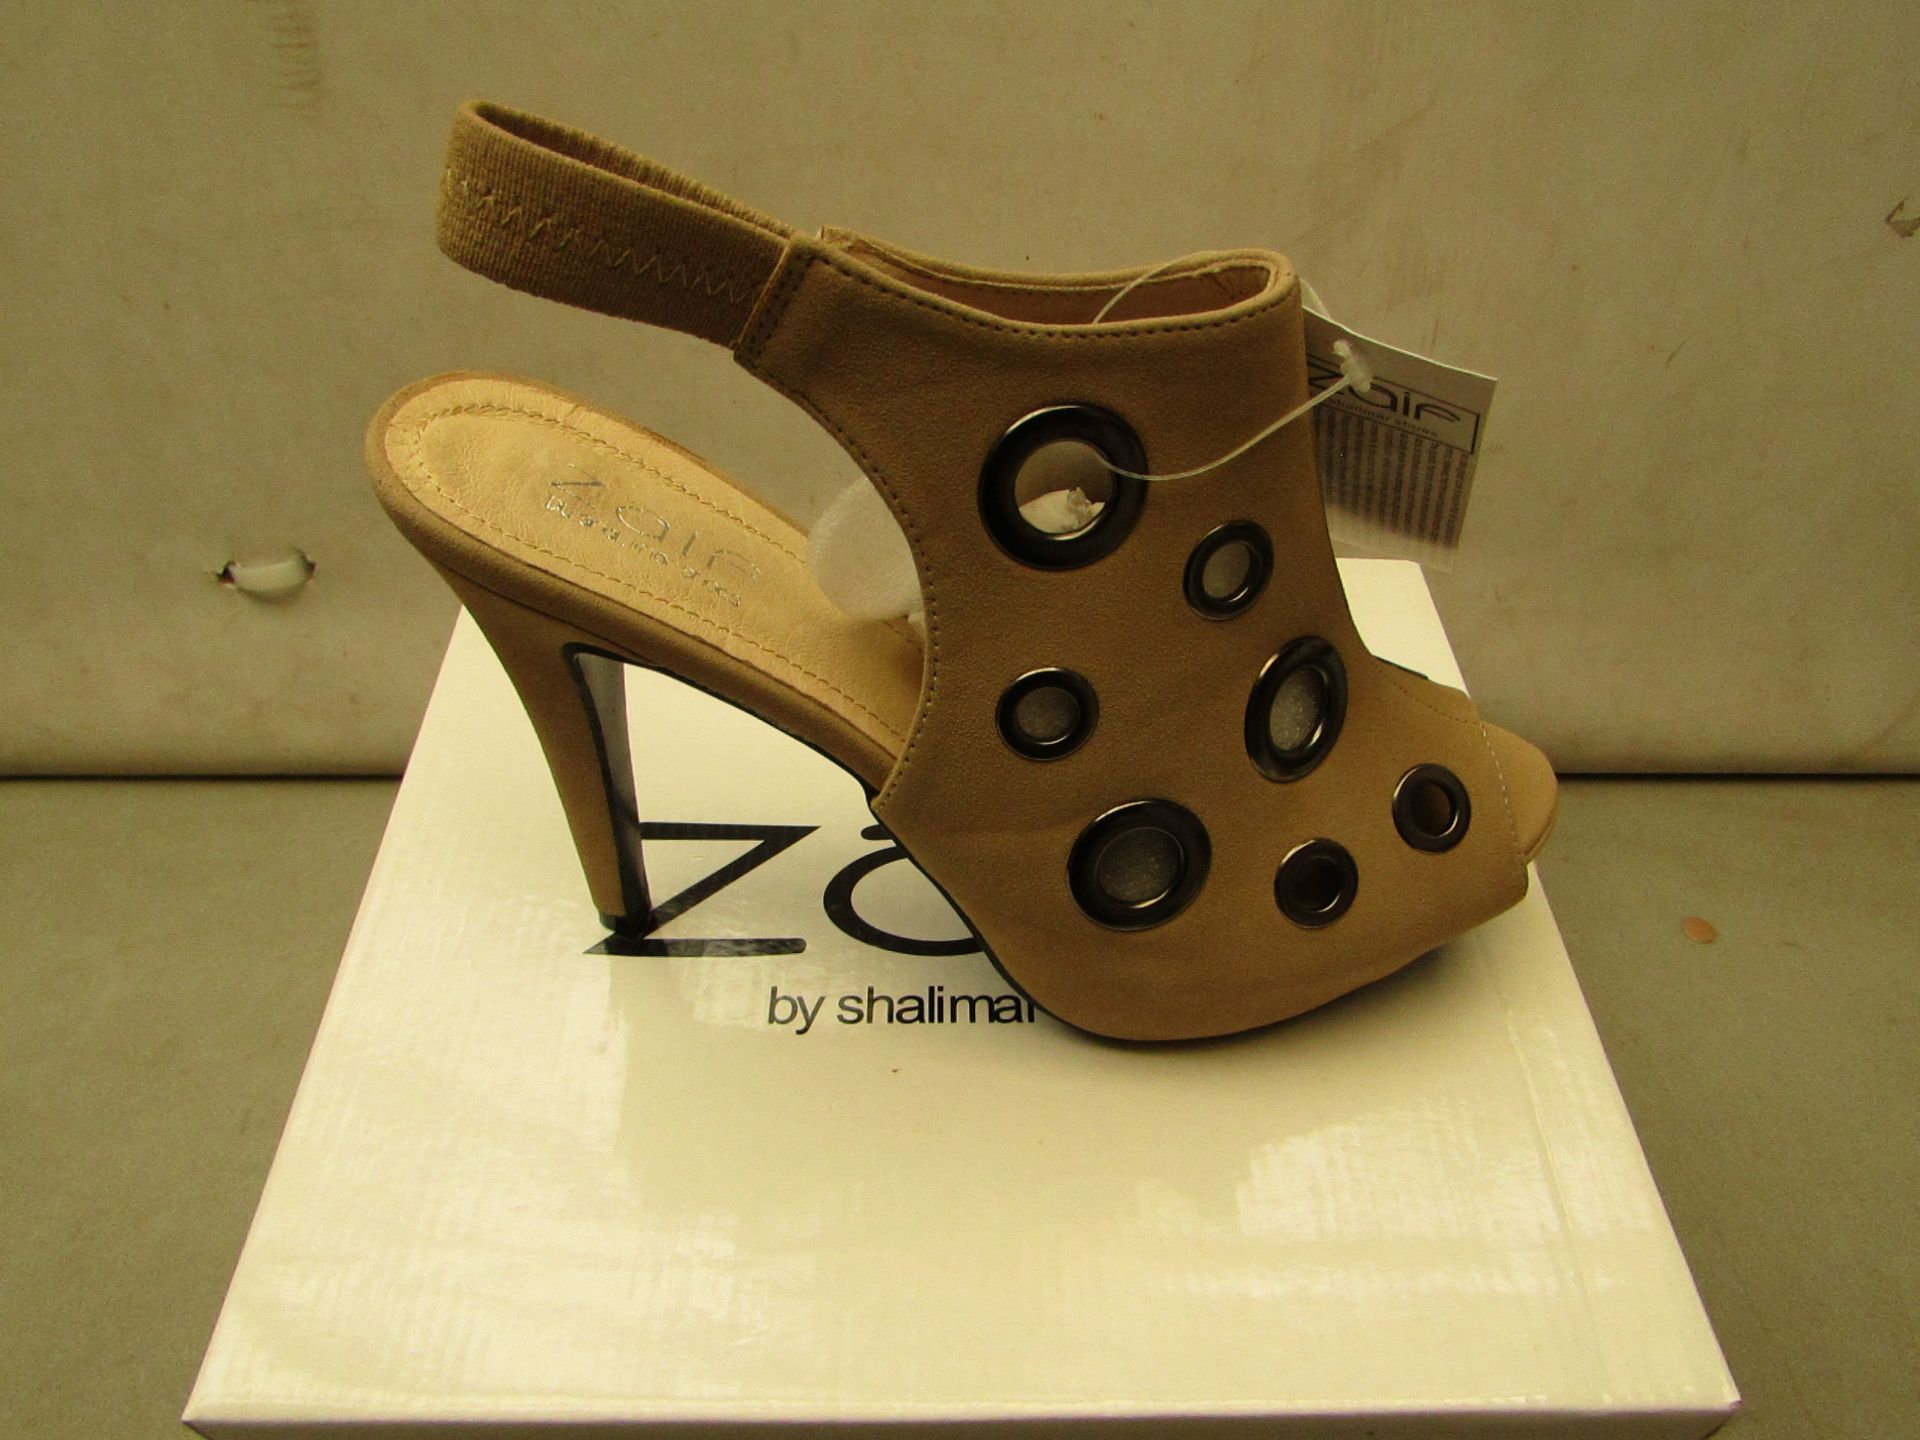 Zaif by Shalamar ladies Suede and eyelet Shoes size 7 new & boxed see image for design